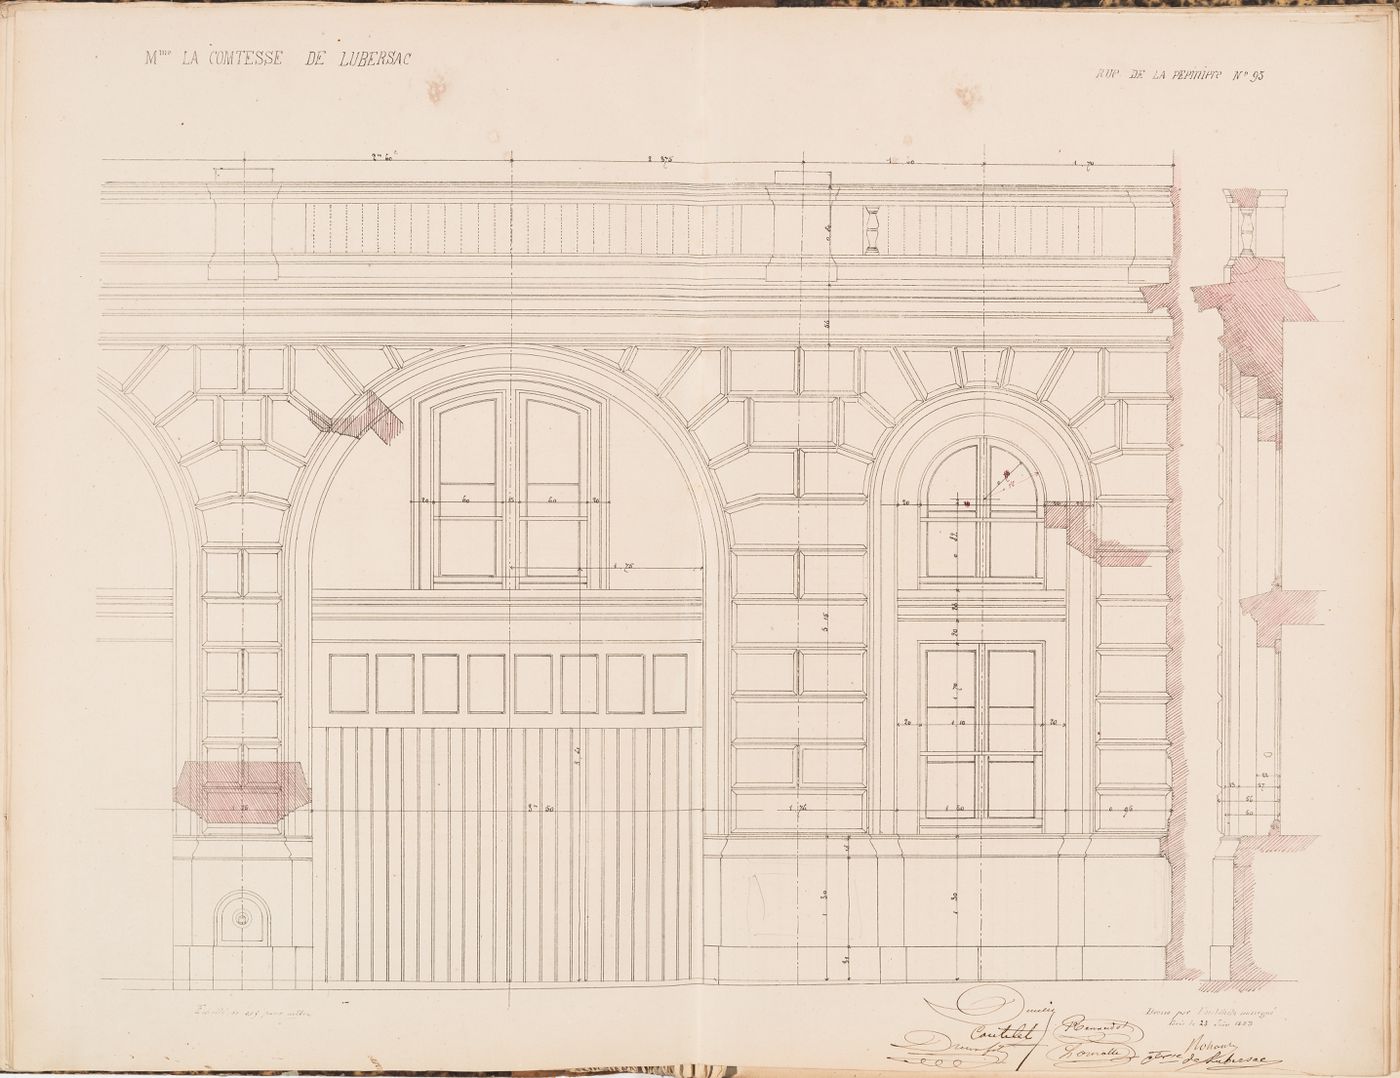 Contract drawing for a house for Madame la comtesse de Lubersac, 95 rue de la Pépinière, Paris: Partial elevation with profiles and a wall section for the service wing